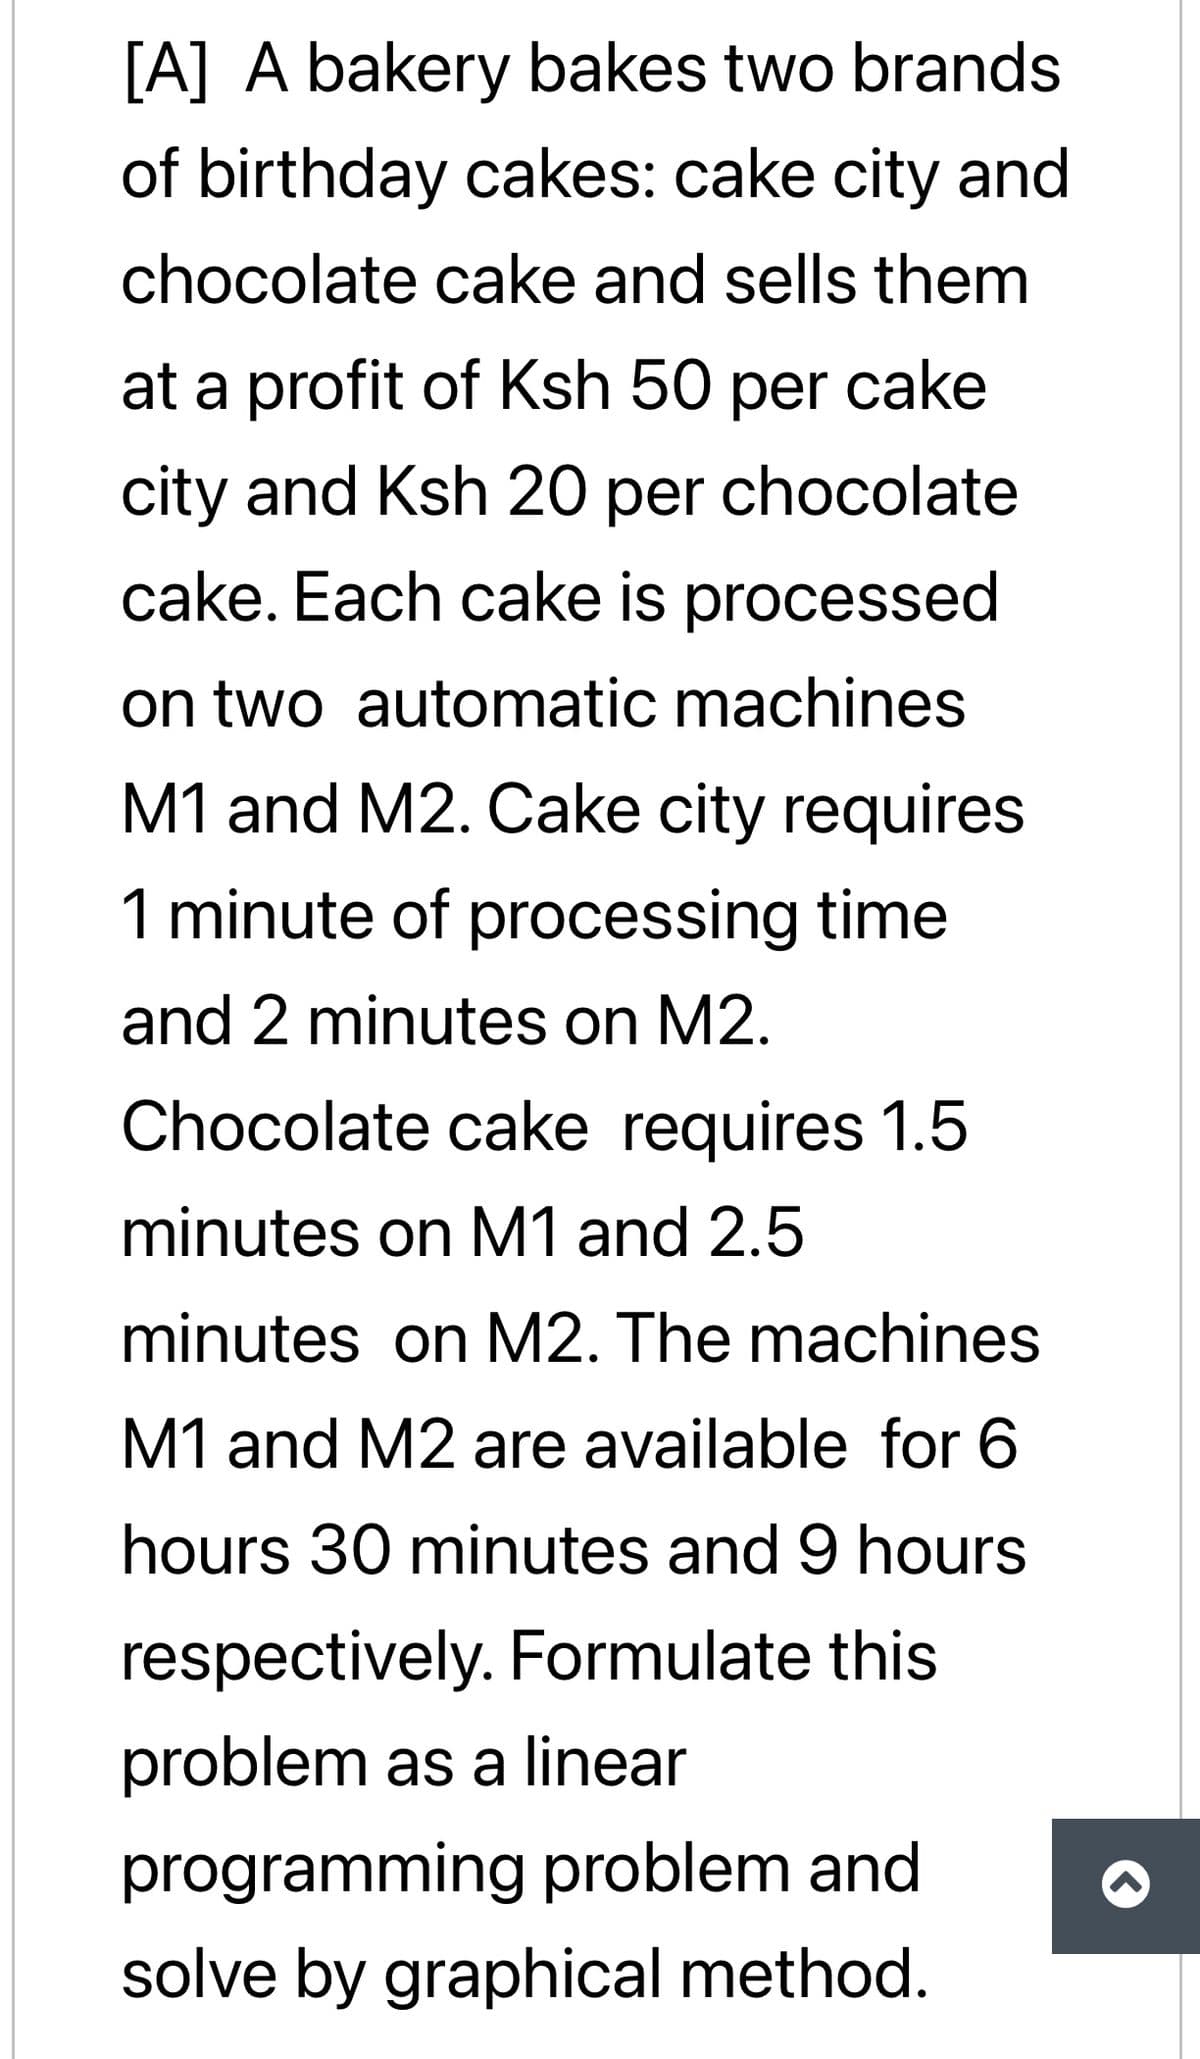 [A] A bakery bakes two brands
of birthday cakes: cake city and
chocolate cake and sells them
at a profit of Ksh 50 per cake
city and Ksh 20 per chocolate
cake. Each cake is processed
on two automatic machines
M1 and M2. Cake city requires
1 minute of processing time
and 2 minutes on M2.
Chocolate cake requires 1.5
minutes on M1 and 2.5
minutes on M2. The machines
M1 and M2 are available for 6
hours 30 minutes and 9 hours
respectively. Formulate this
problem as a linear
programming problem and
solve by graphical method.
